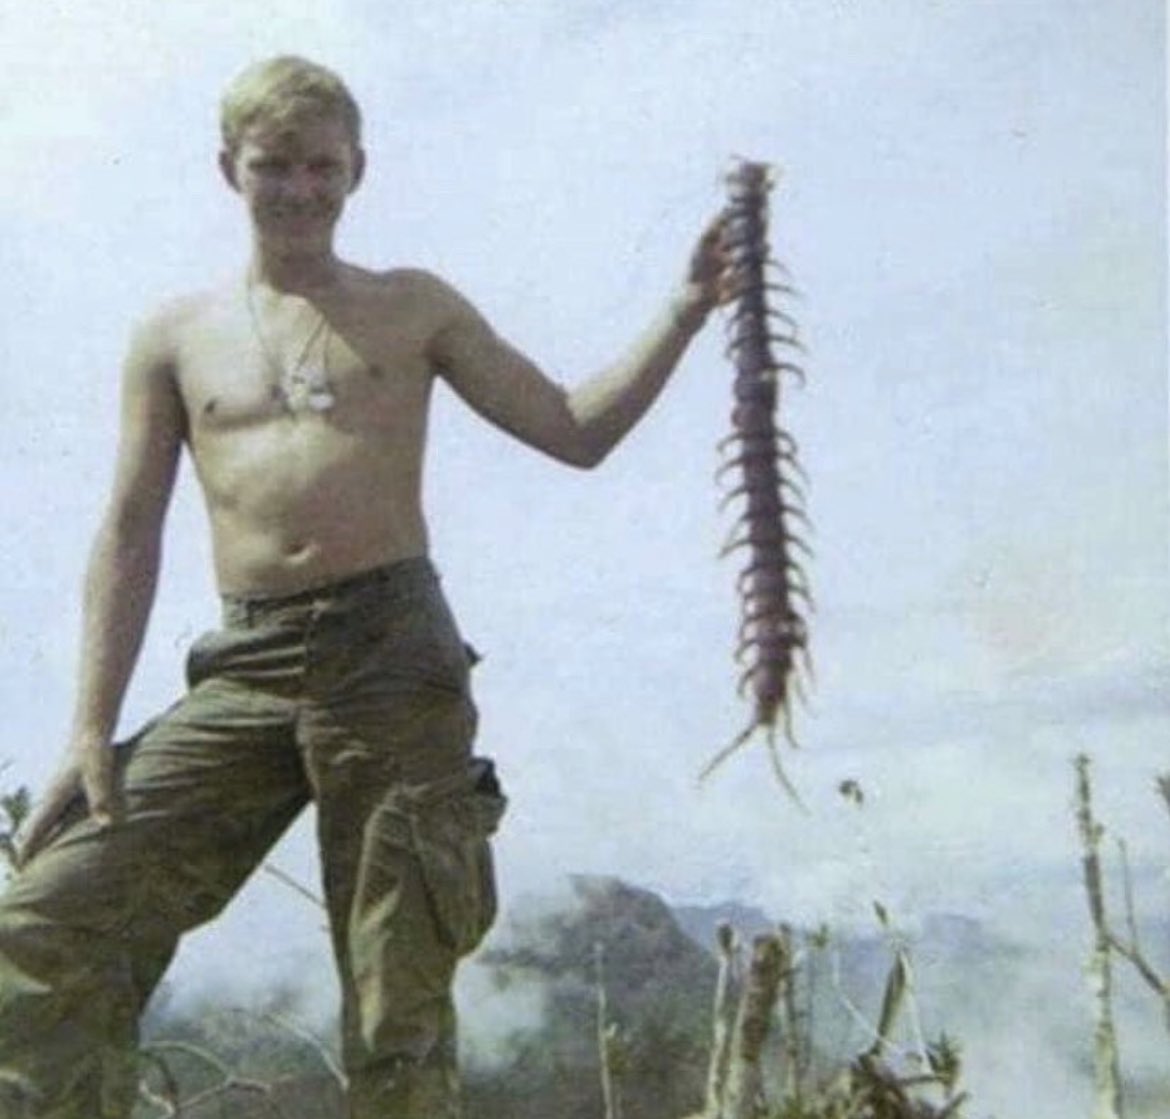 In 1967, during the Vietnam War, an American soldier held up a Scolopendra subspinipes, a species of giant centipede found throughout Asia. The centipede preys on insects like spiders and scorpions but can overpower small mammals or reptiles. It uses its venomous jaws and other